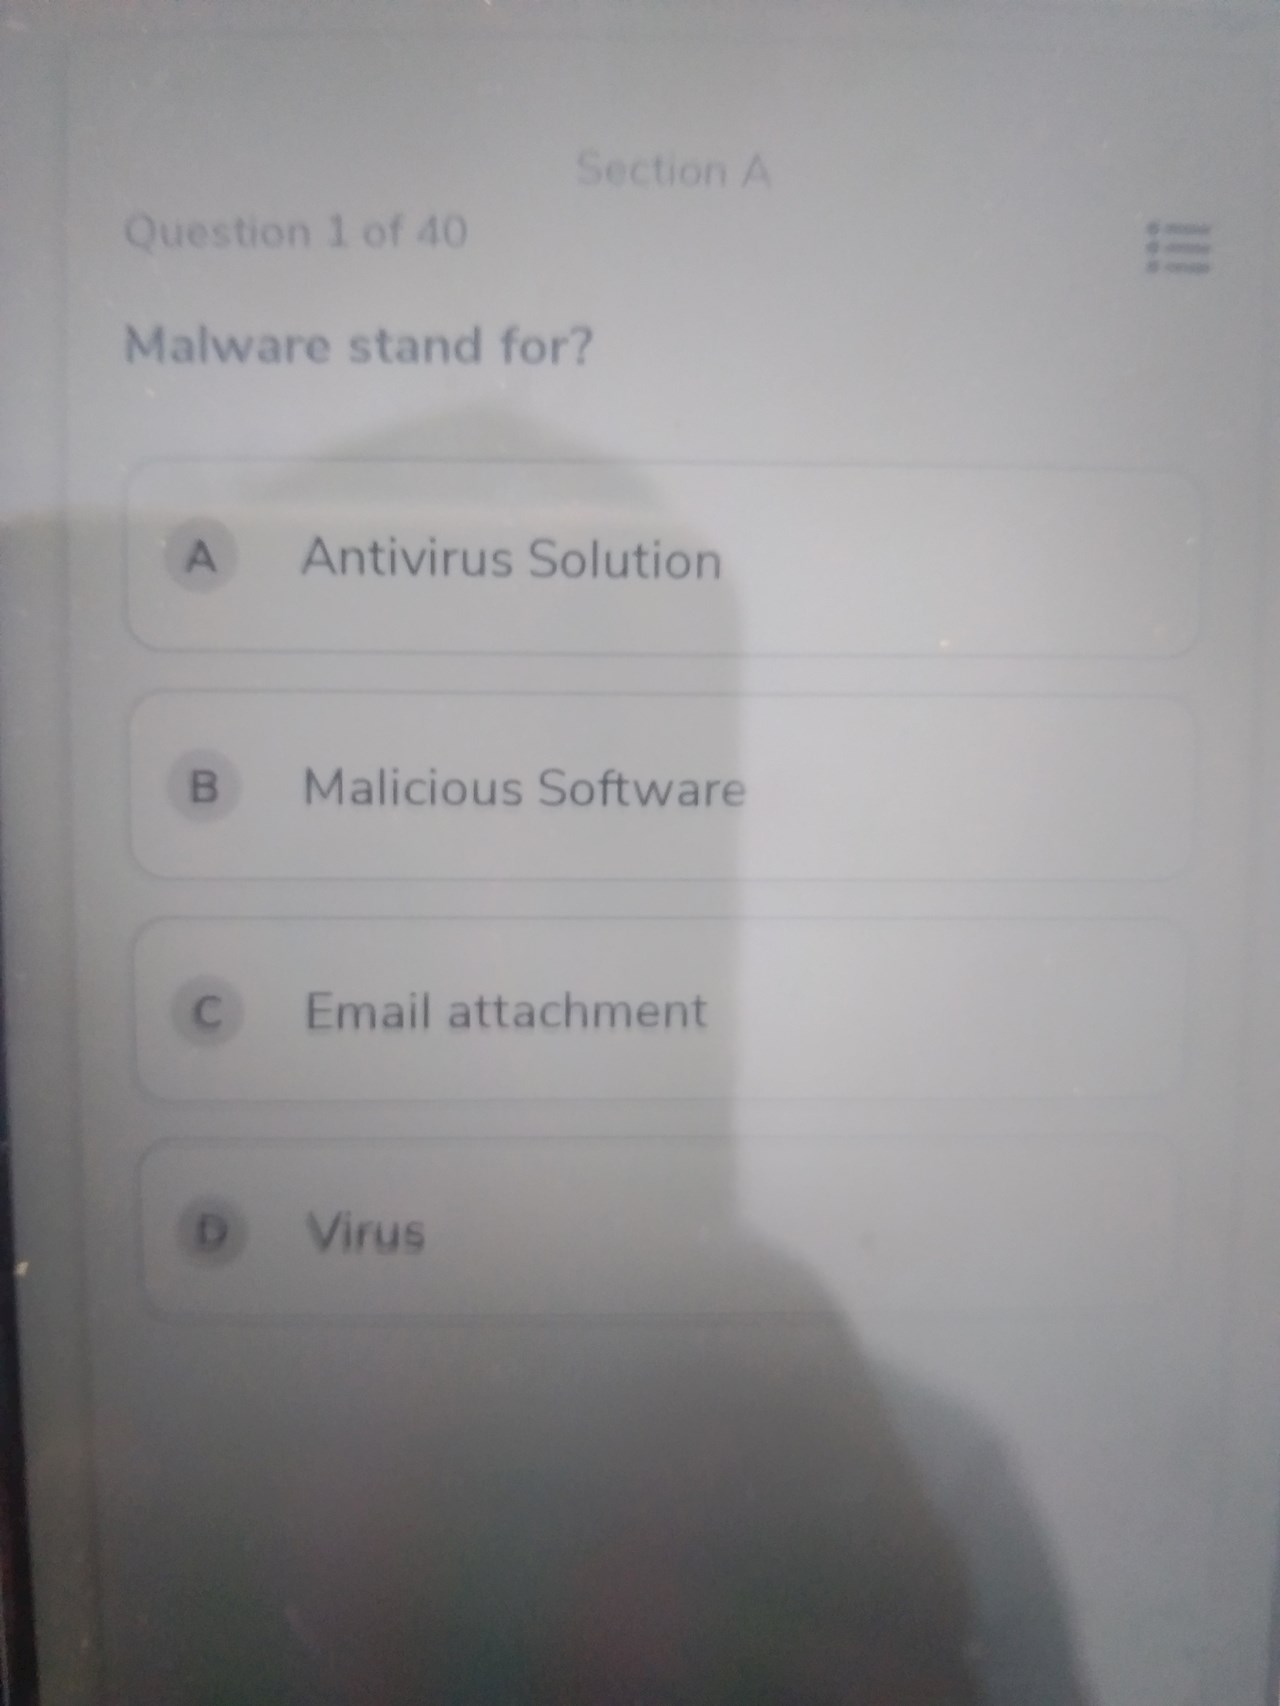 Malware stand for?